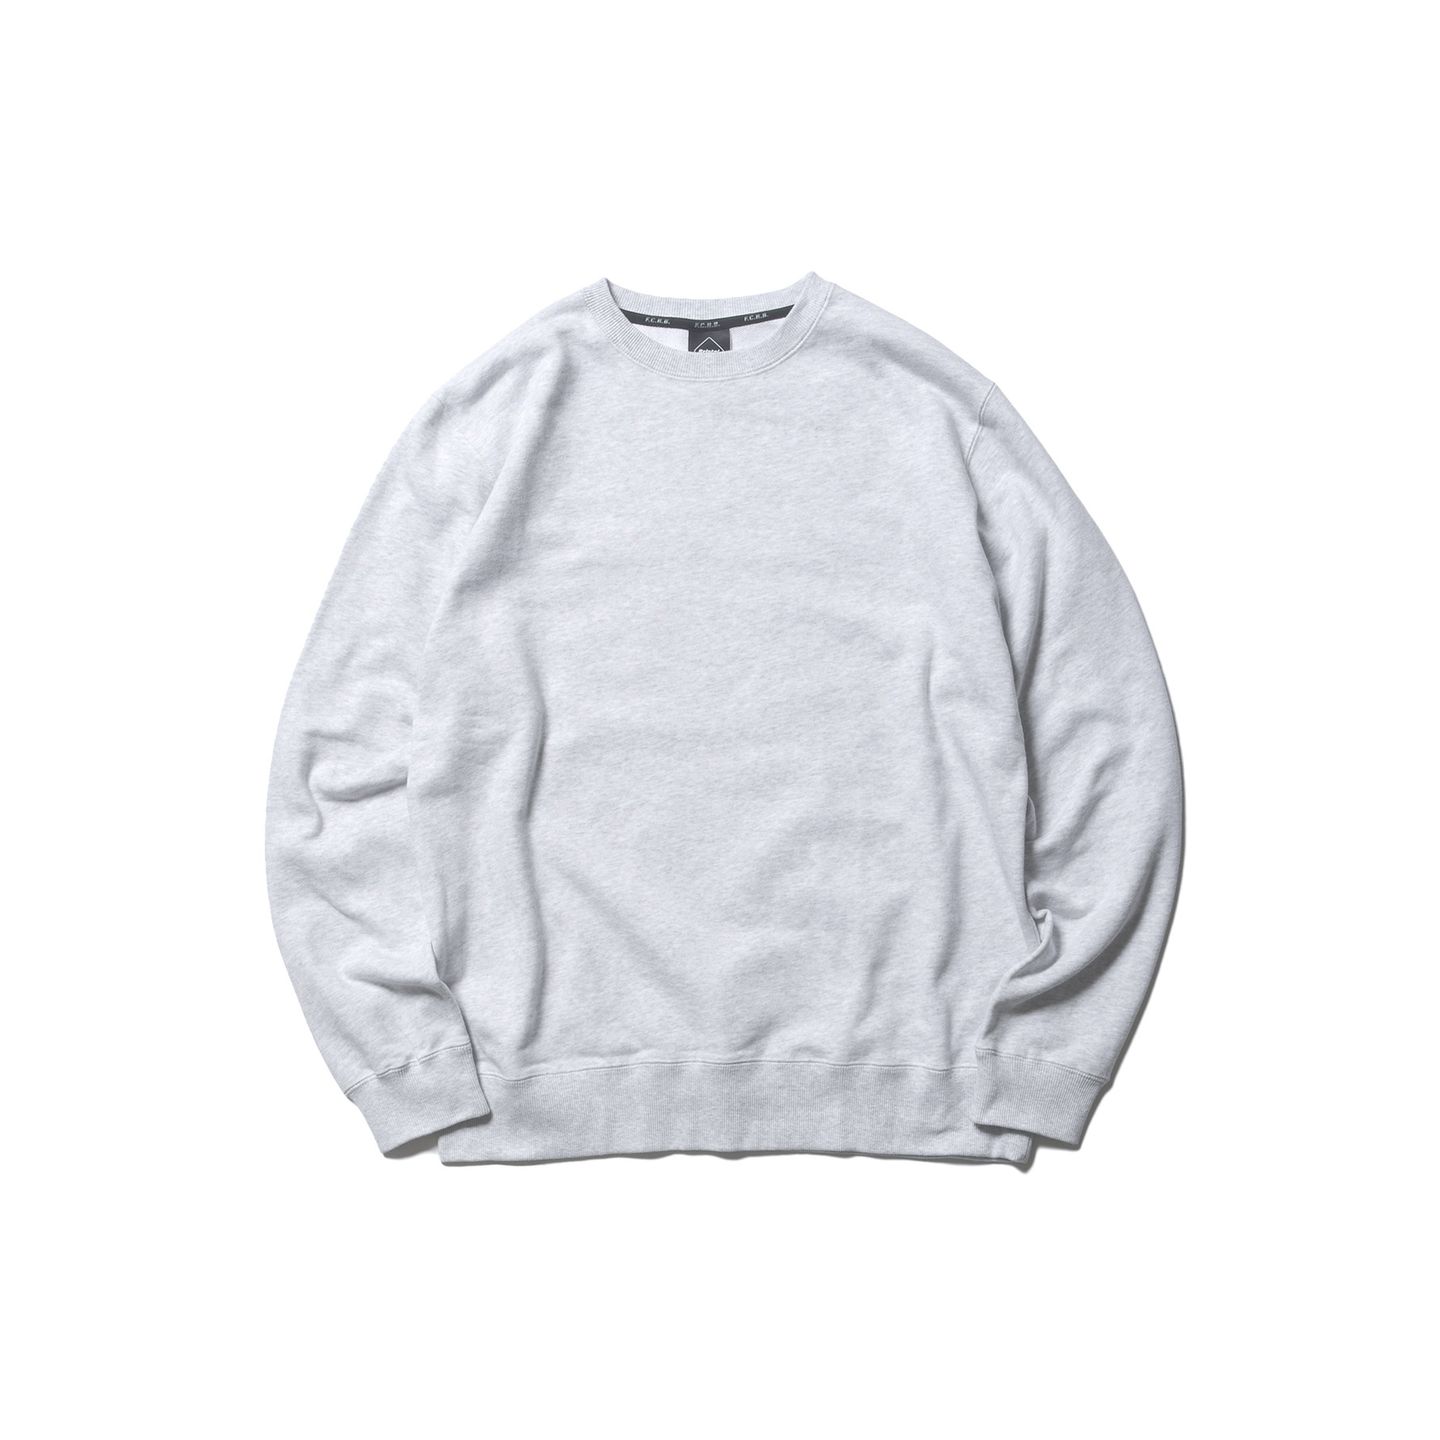 FCRB SYNTHETIC LEATHER APPLIQUE CREWNECK SWEAT / GRAY / XL (FCRB ...